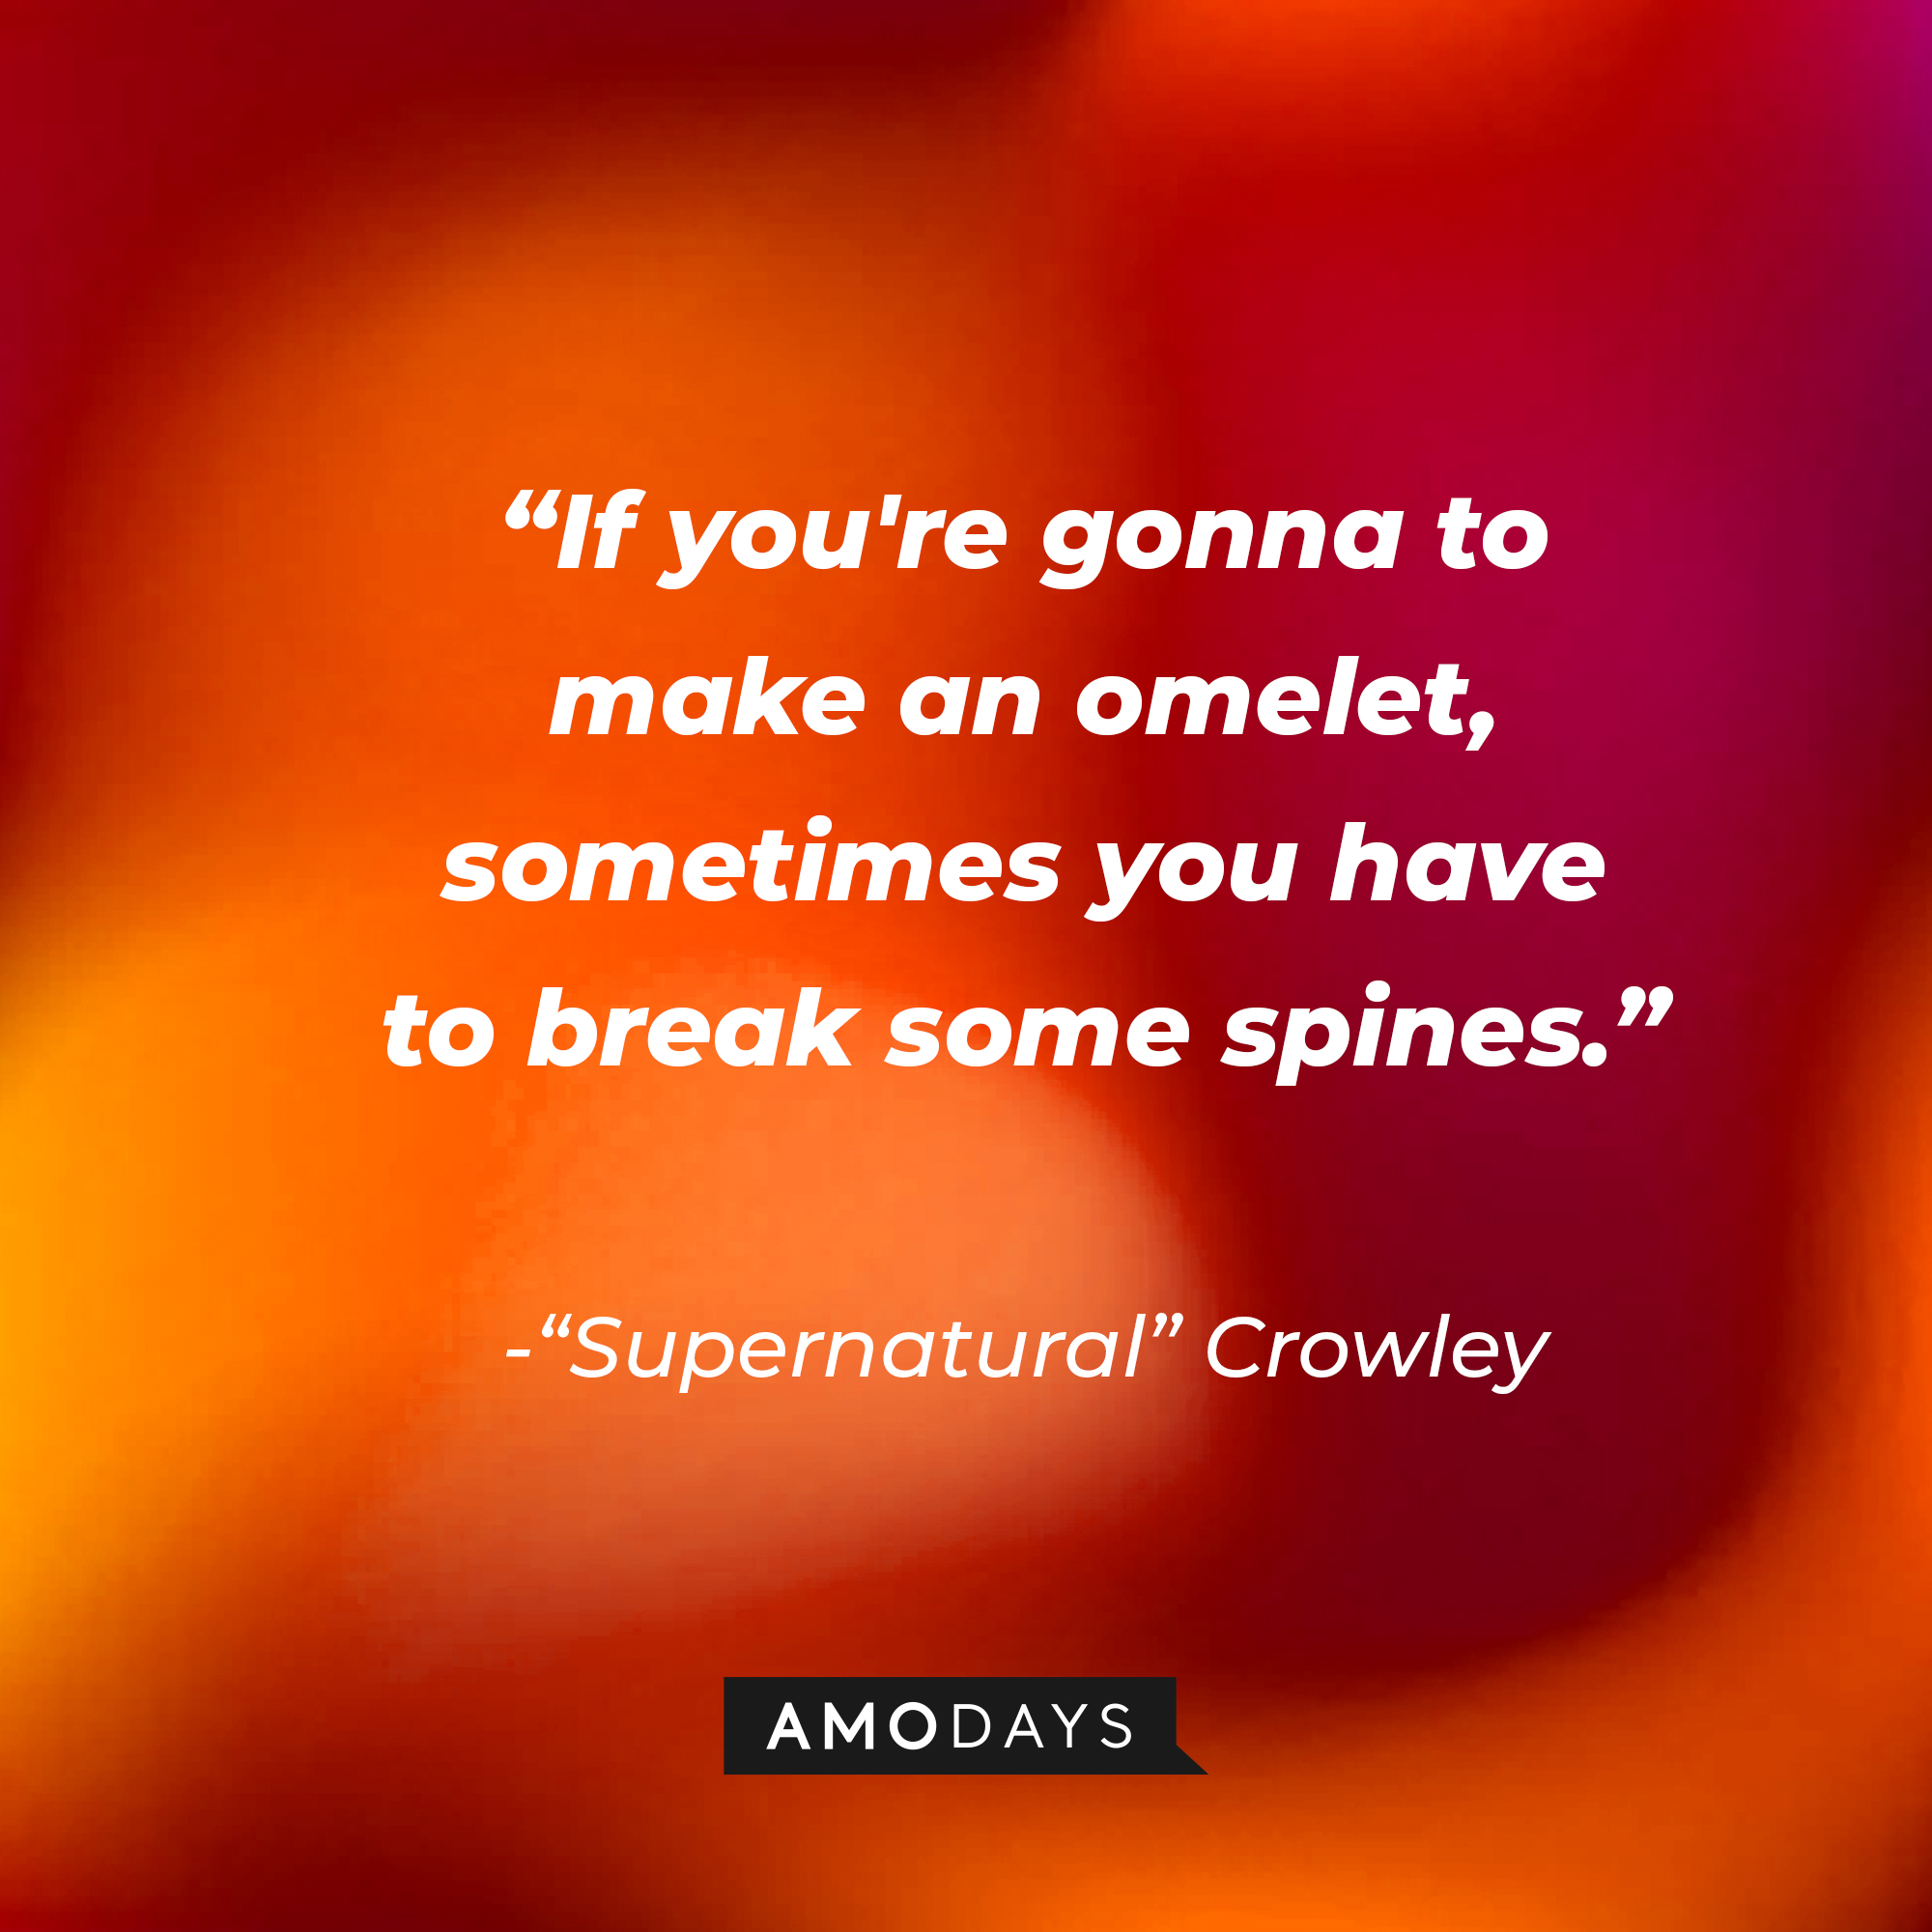 "Supernatural" Crowley's quote: "If you're gonna to make an omelet, sometimes you have to break some spines." | Source: AmoDays